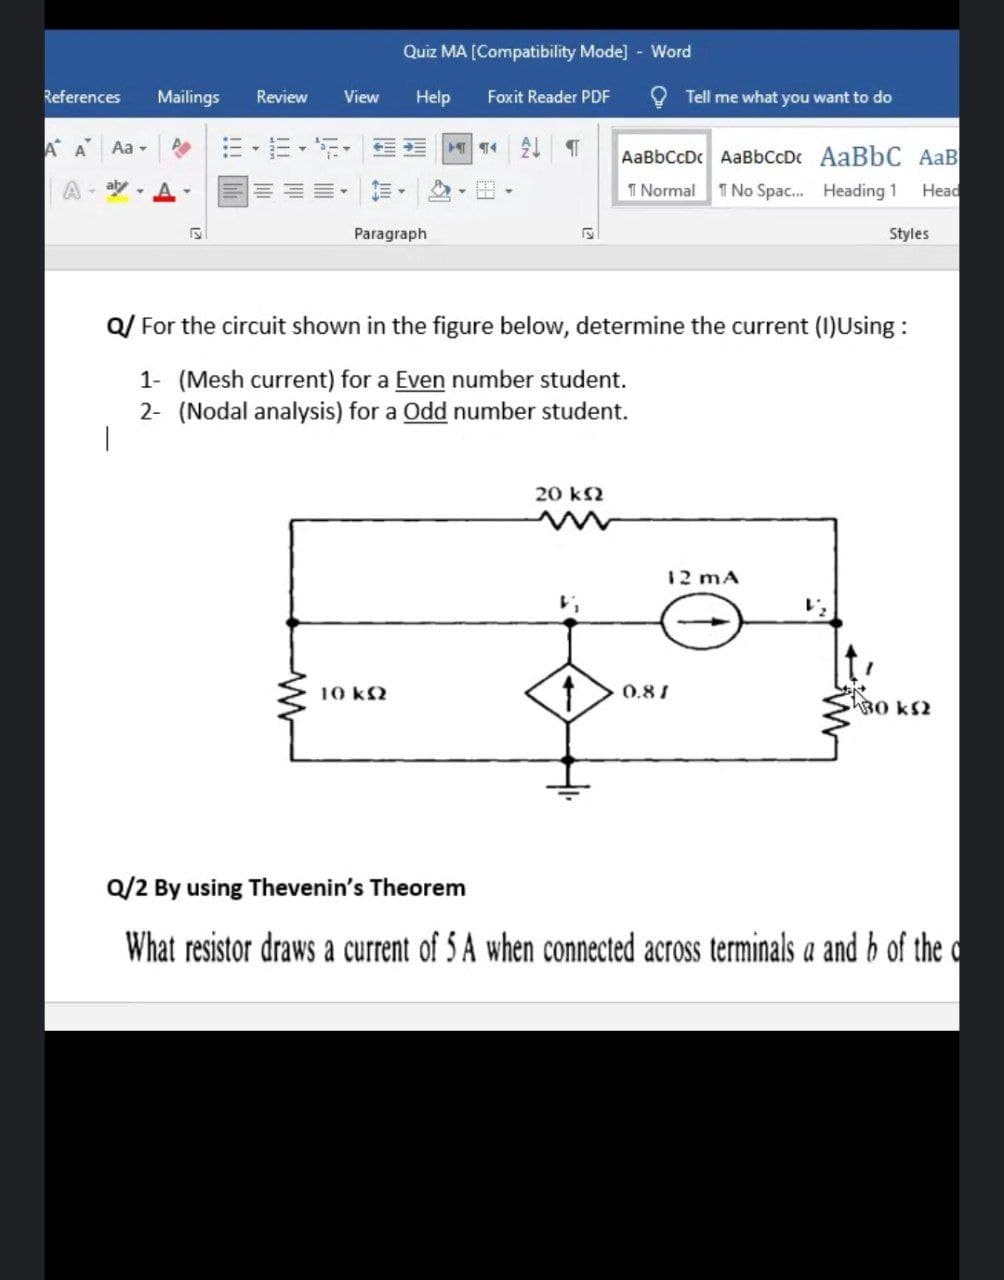 Quiz MA [Compatibility Mode] - Word
References
Mailings
Review
View
Help
Foxit Reader PDF
Tell me what you want to do
A A
Aa -
E -E- E-
AaBbCcDc AaBbCcDc AaBbC AaB
T Normal 1 No Spac. Heading 1
aly
Head
Paragraph
Styles
Q/ For the circuit shown in the figure below, determine the current (I)Using :
1- (Mesh current) for a Even number student.
2- (Nodal analysis) for a Odd number student.
20 k2
12 mA
10 kS2
0.81
30 kS2
Q/2 By using Thevenin's Theorem
What resistor draws a current of 5 A when connected across terminals a and b of the c
